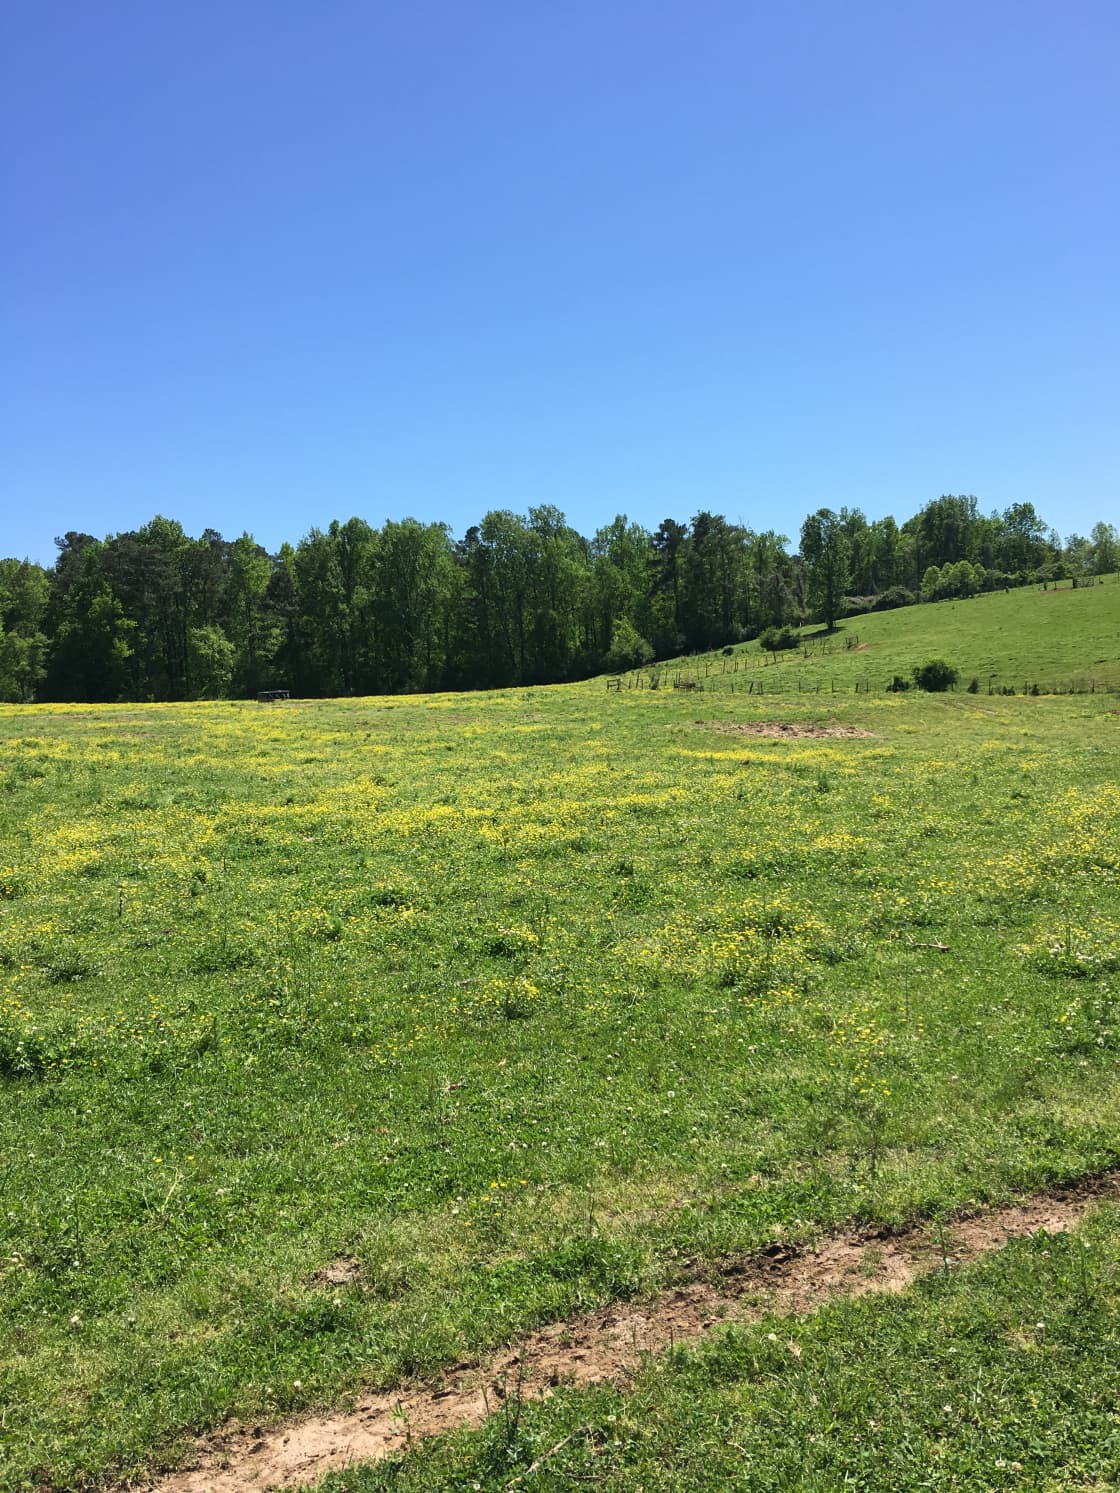 Open pasture land and hardwood forests inspire exploration and nature connection.